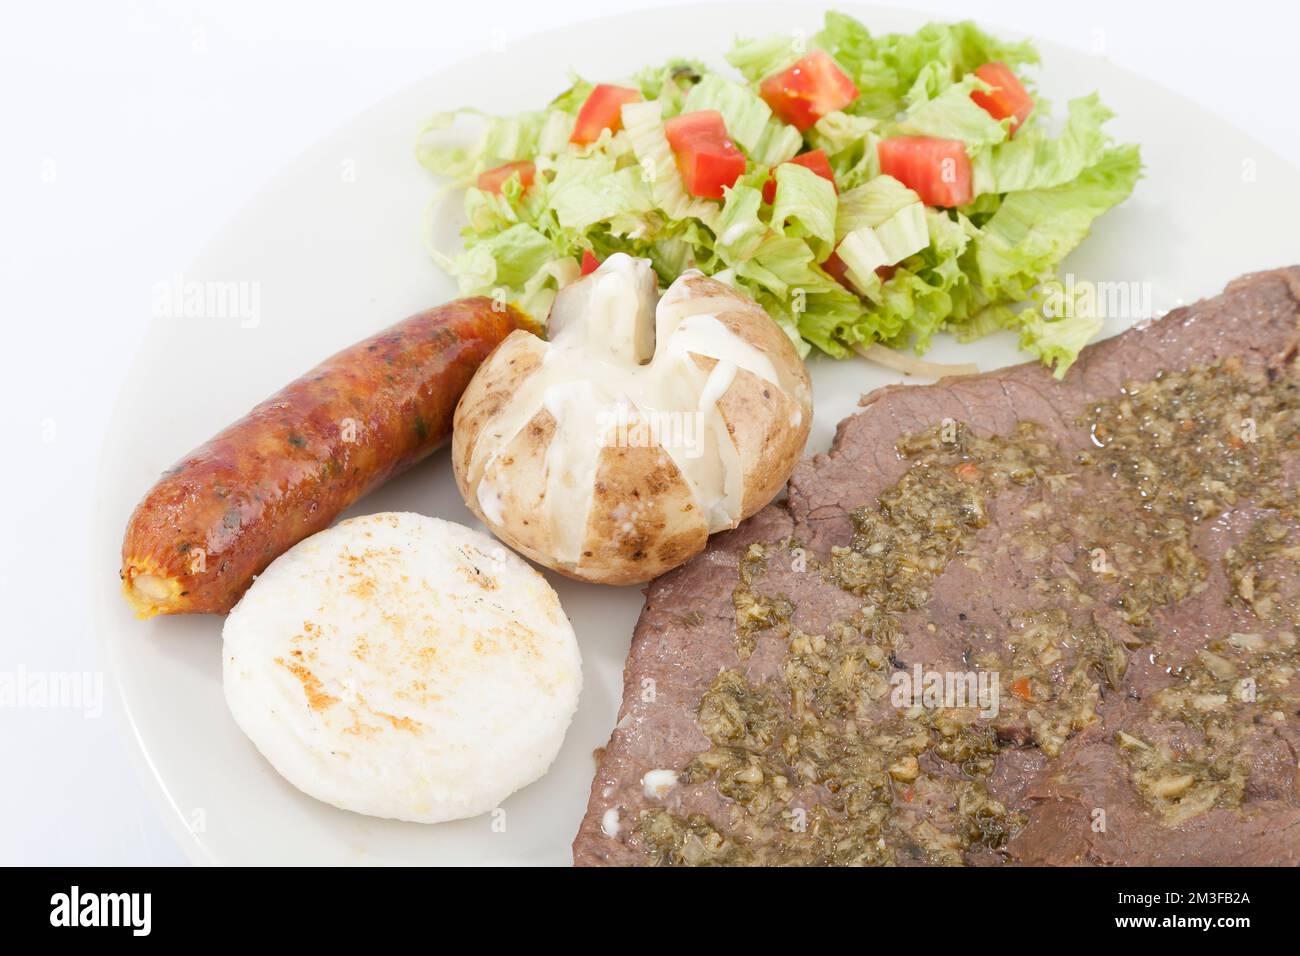 Portion of meat with sausage and corn arepa salad. Stock Photo